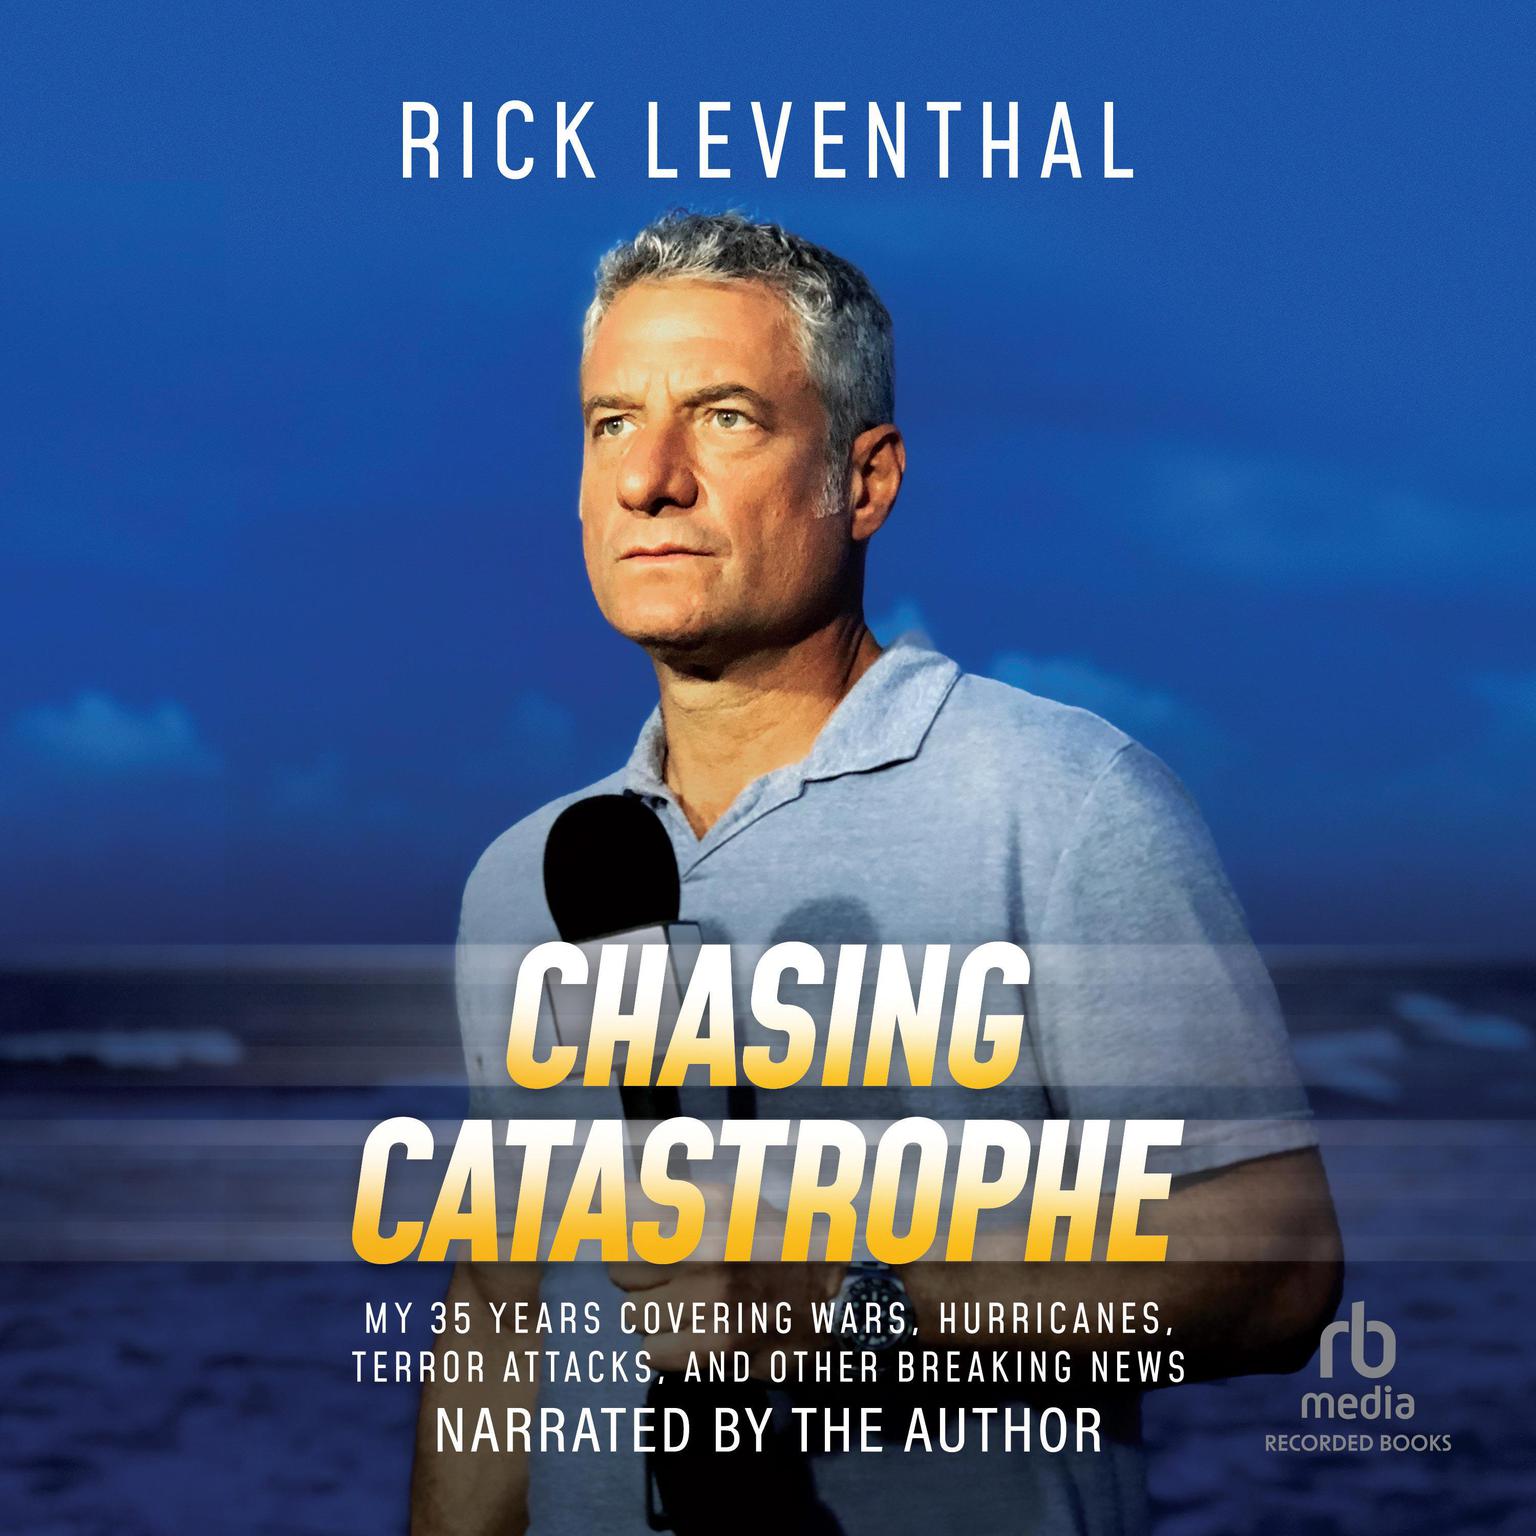 Chasing Catastrophe: My 35 Years Covering Wars, Hurricanes, Terror Attacks, and Other Breaking News Audiobook, by Rick Leventhal